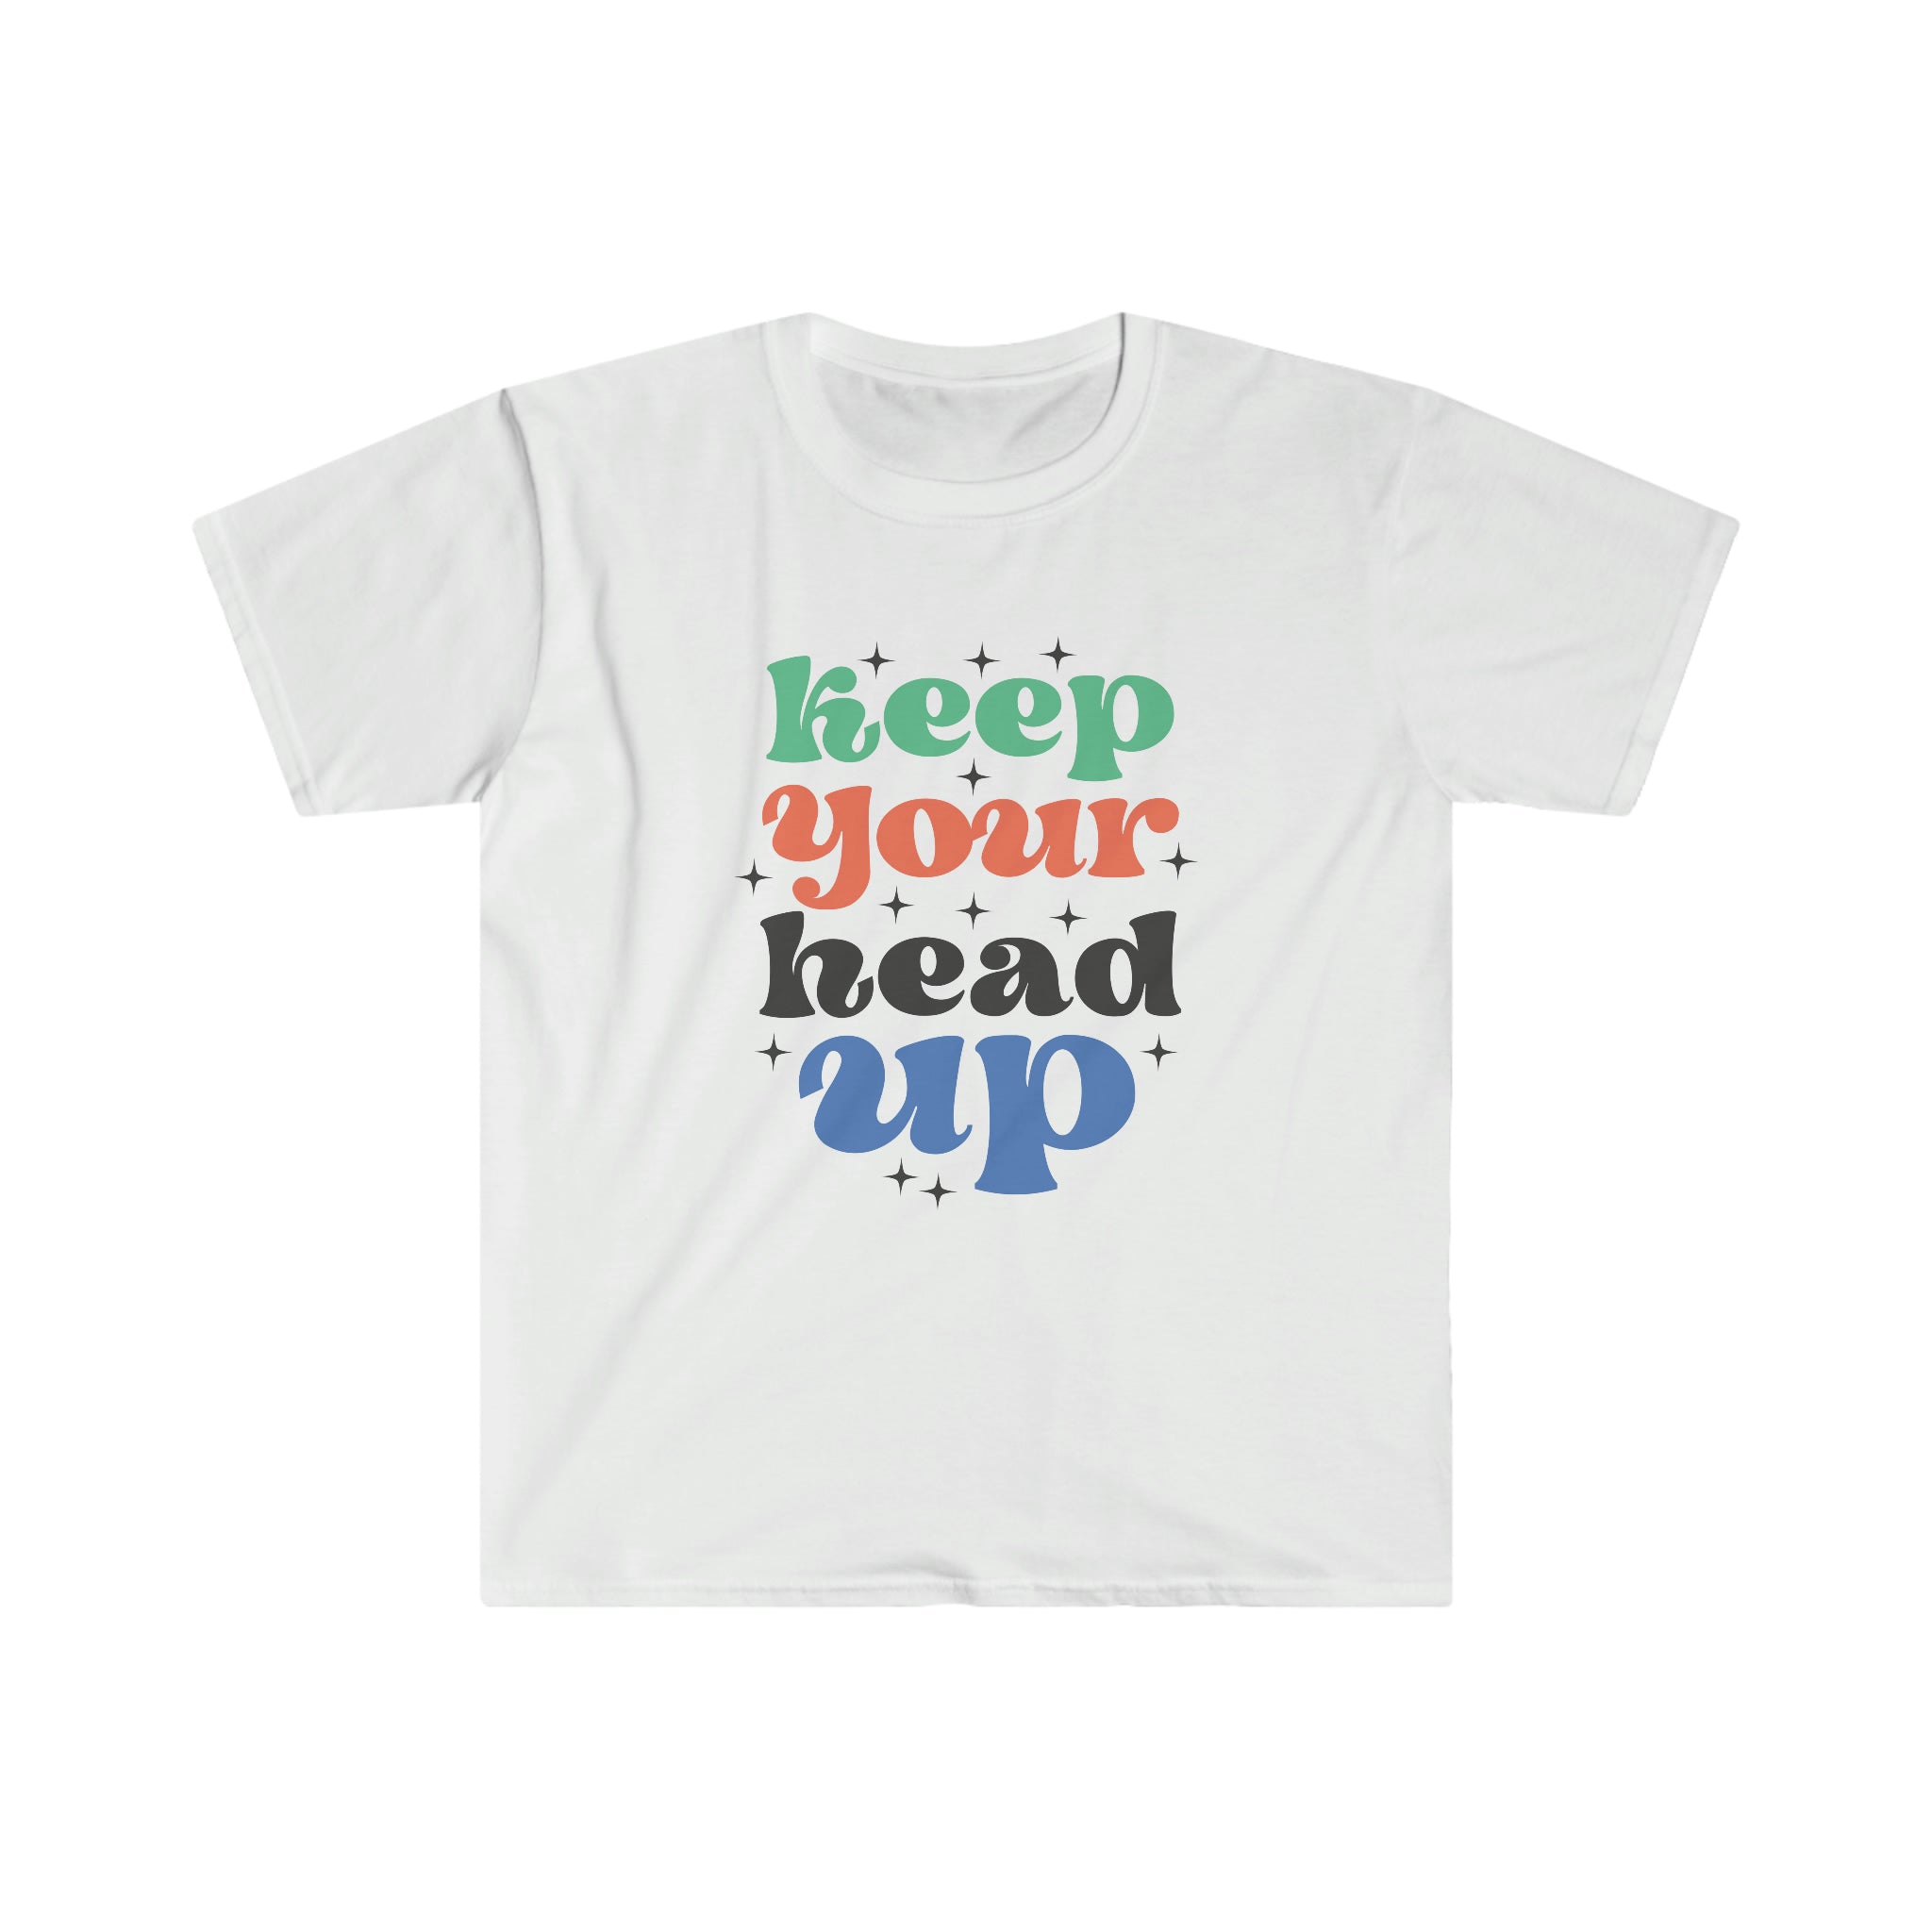 A white "Keep Your Head Up" t-shirt.